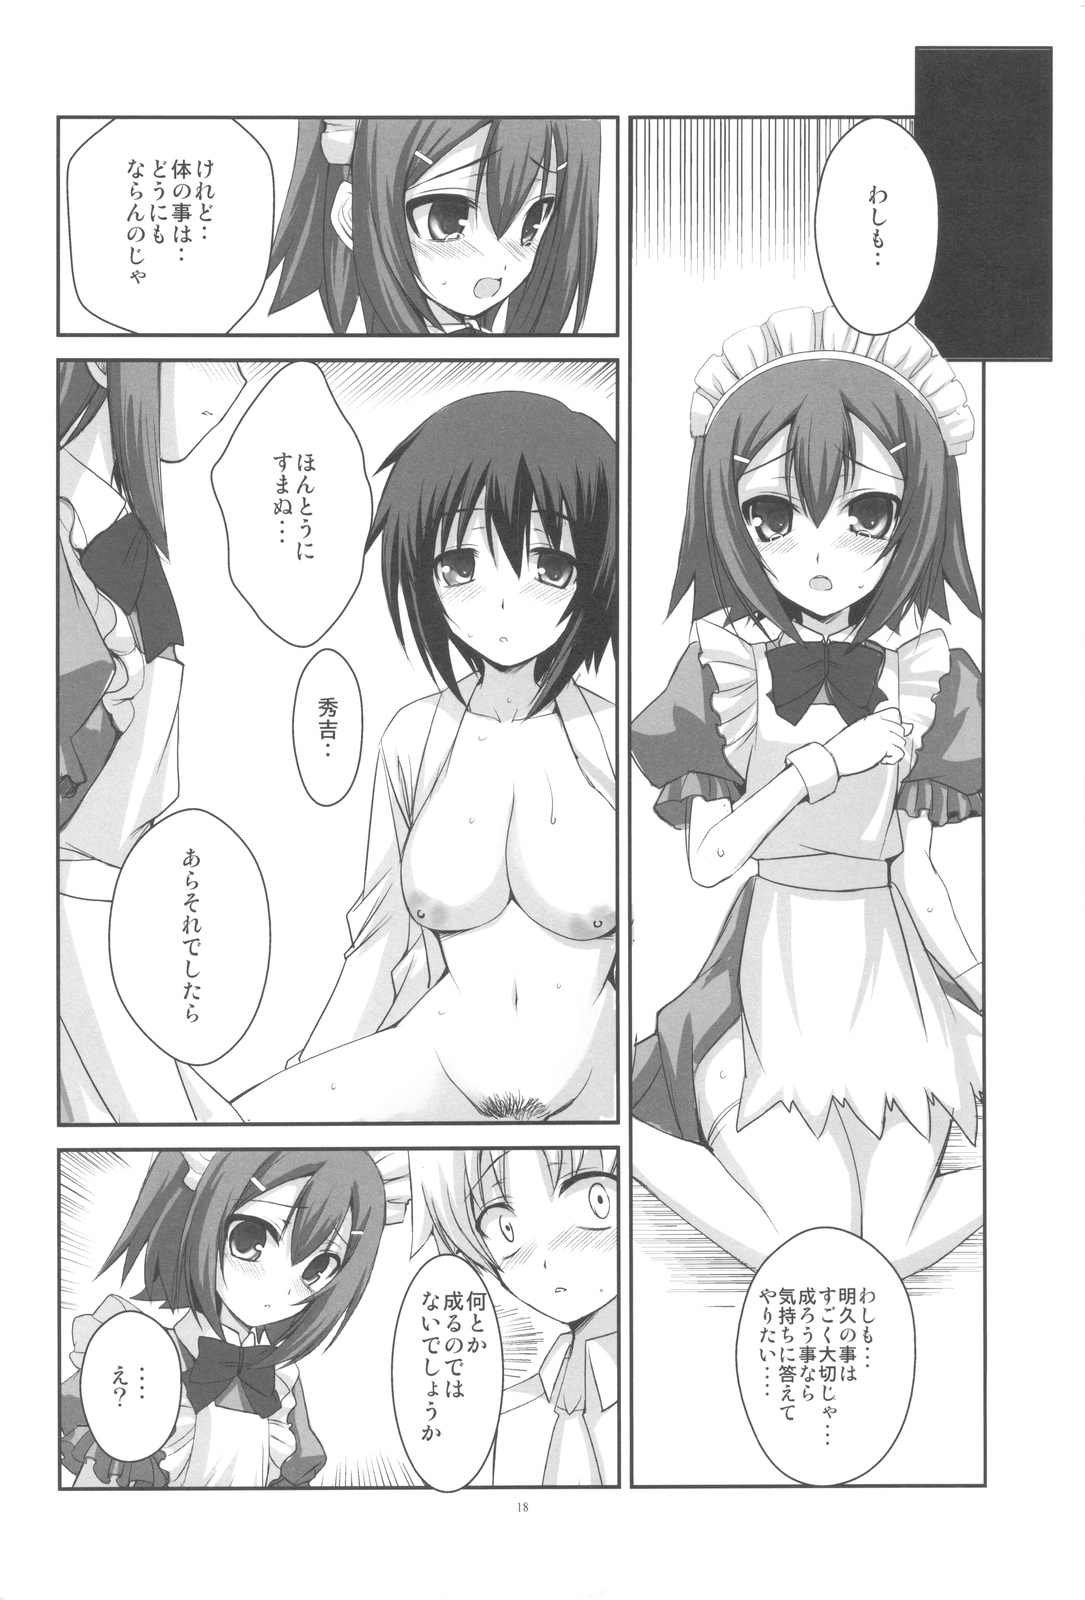 (COMIC1☆4) [R-WORKS] LOVE IS GAME OVER (Baka to Test to Shoukanjuu) page 18 full